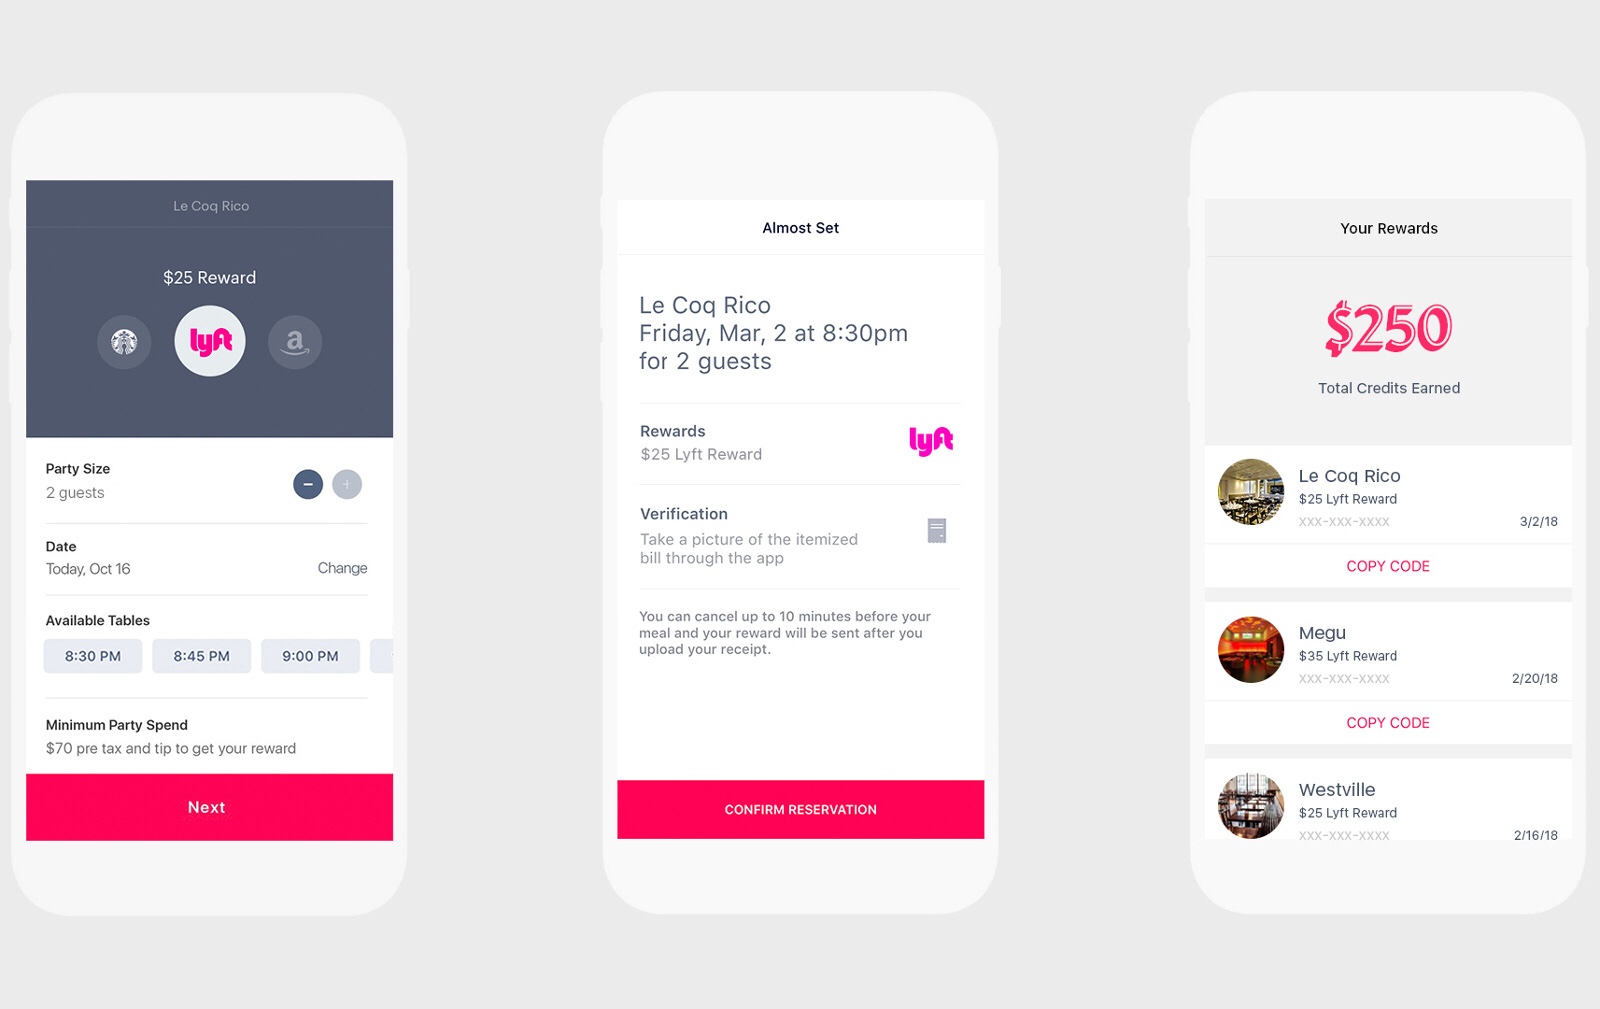 Score Lyft credits by booking a reservation through Seated